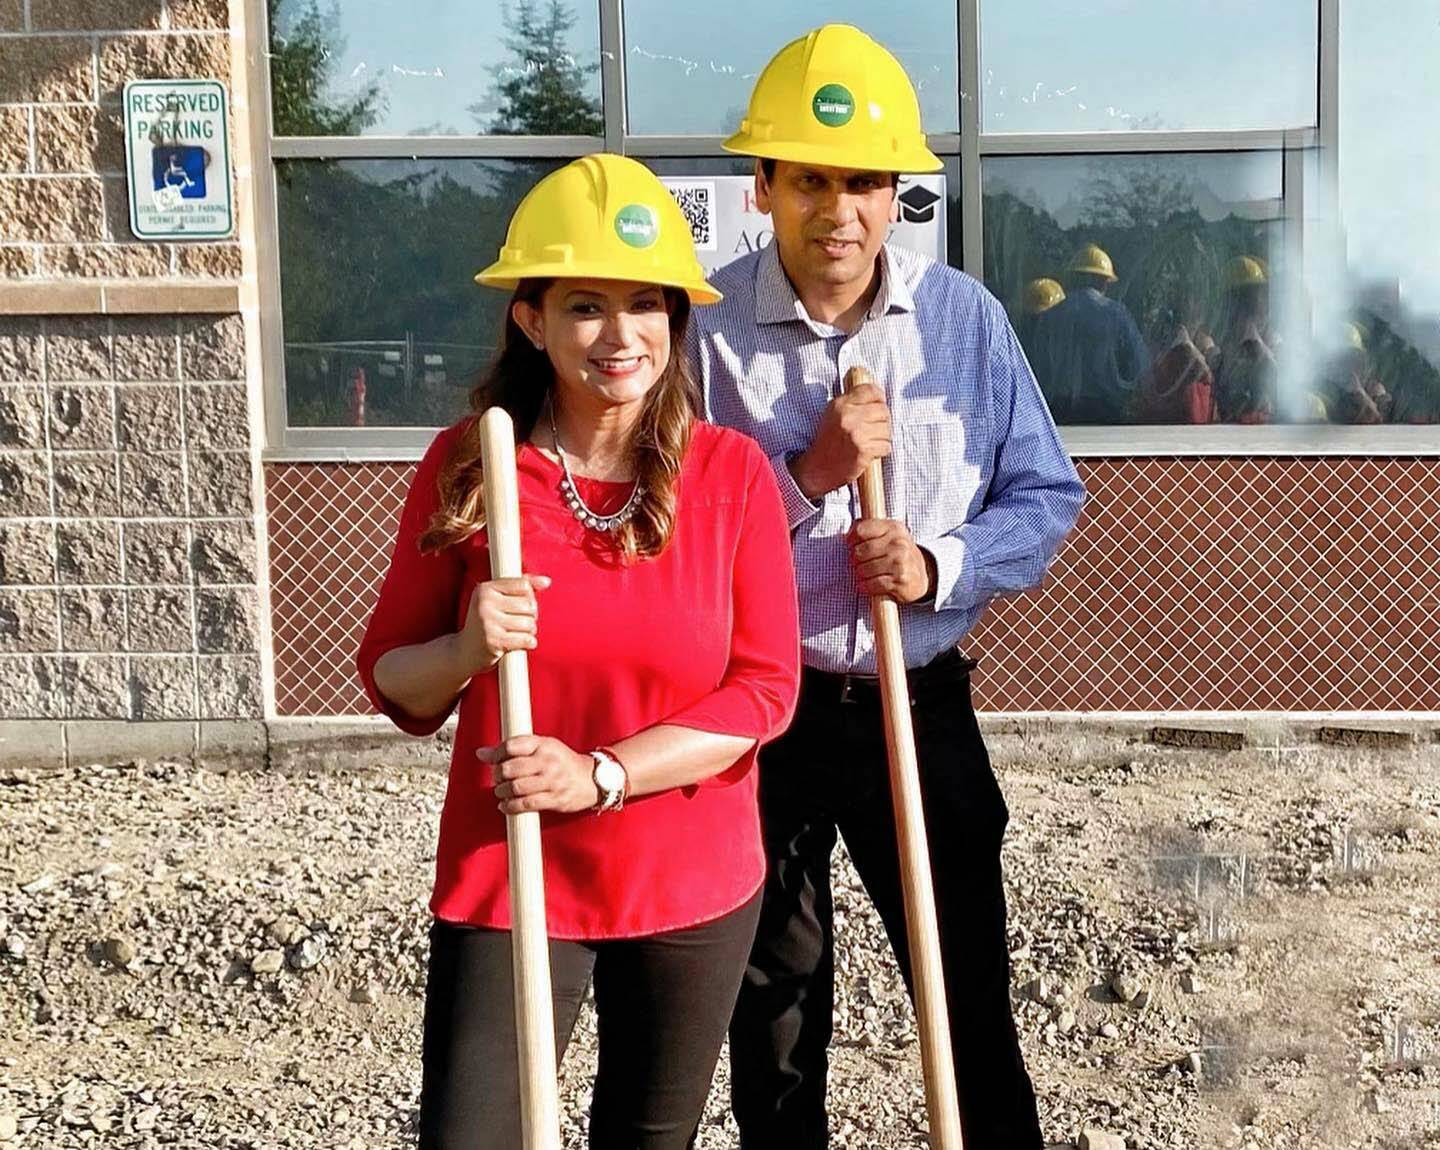 Kiddie Academy owner Vasudha Sharma with her husband Puneet at the ground breaking ceremony. Photo courtesy of the SnoValley Chamber.